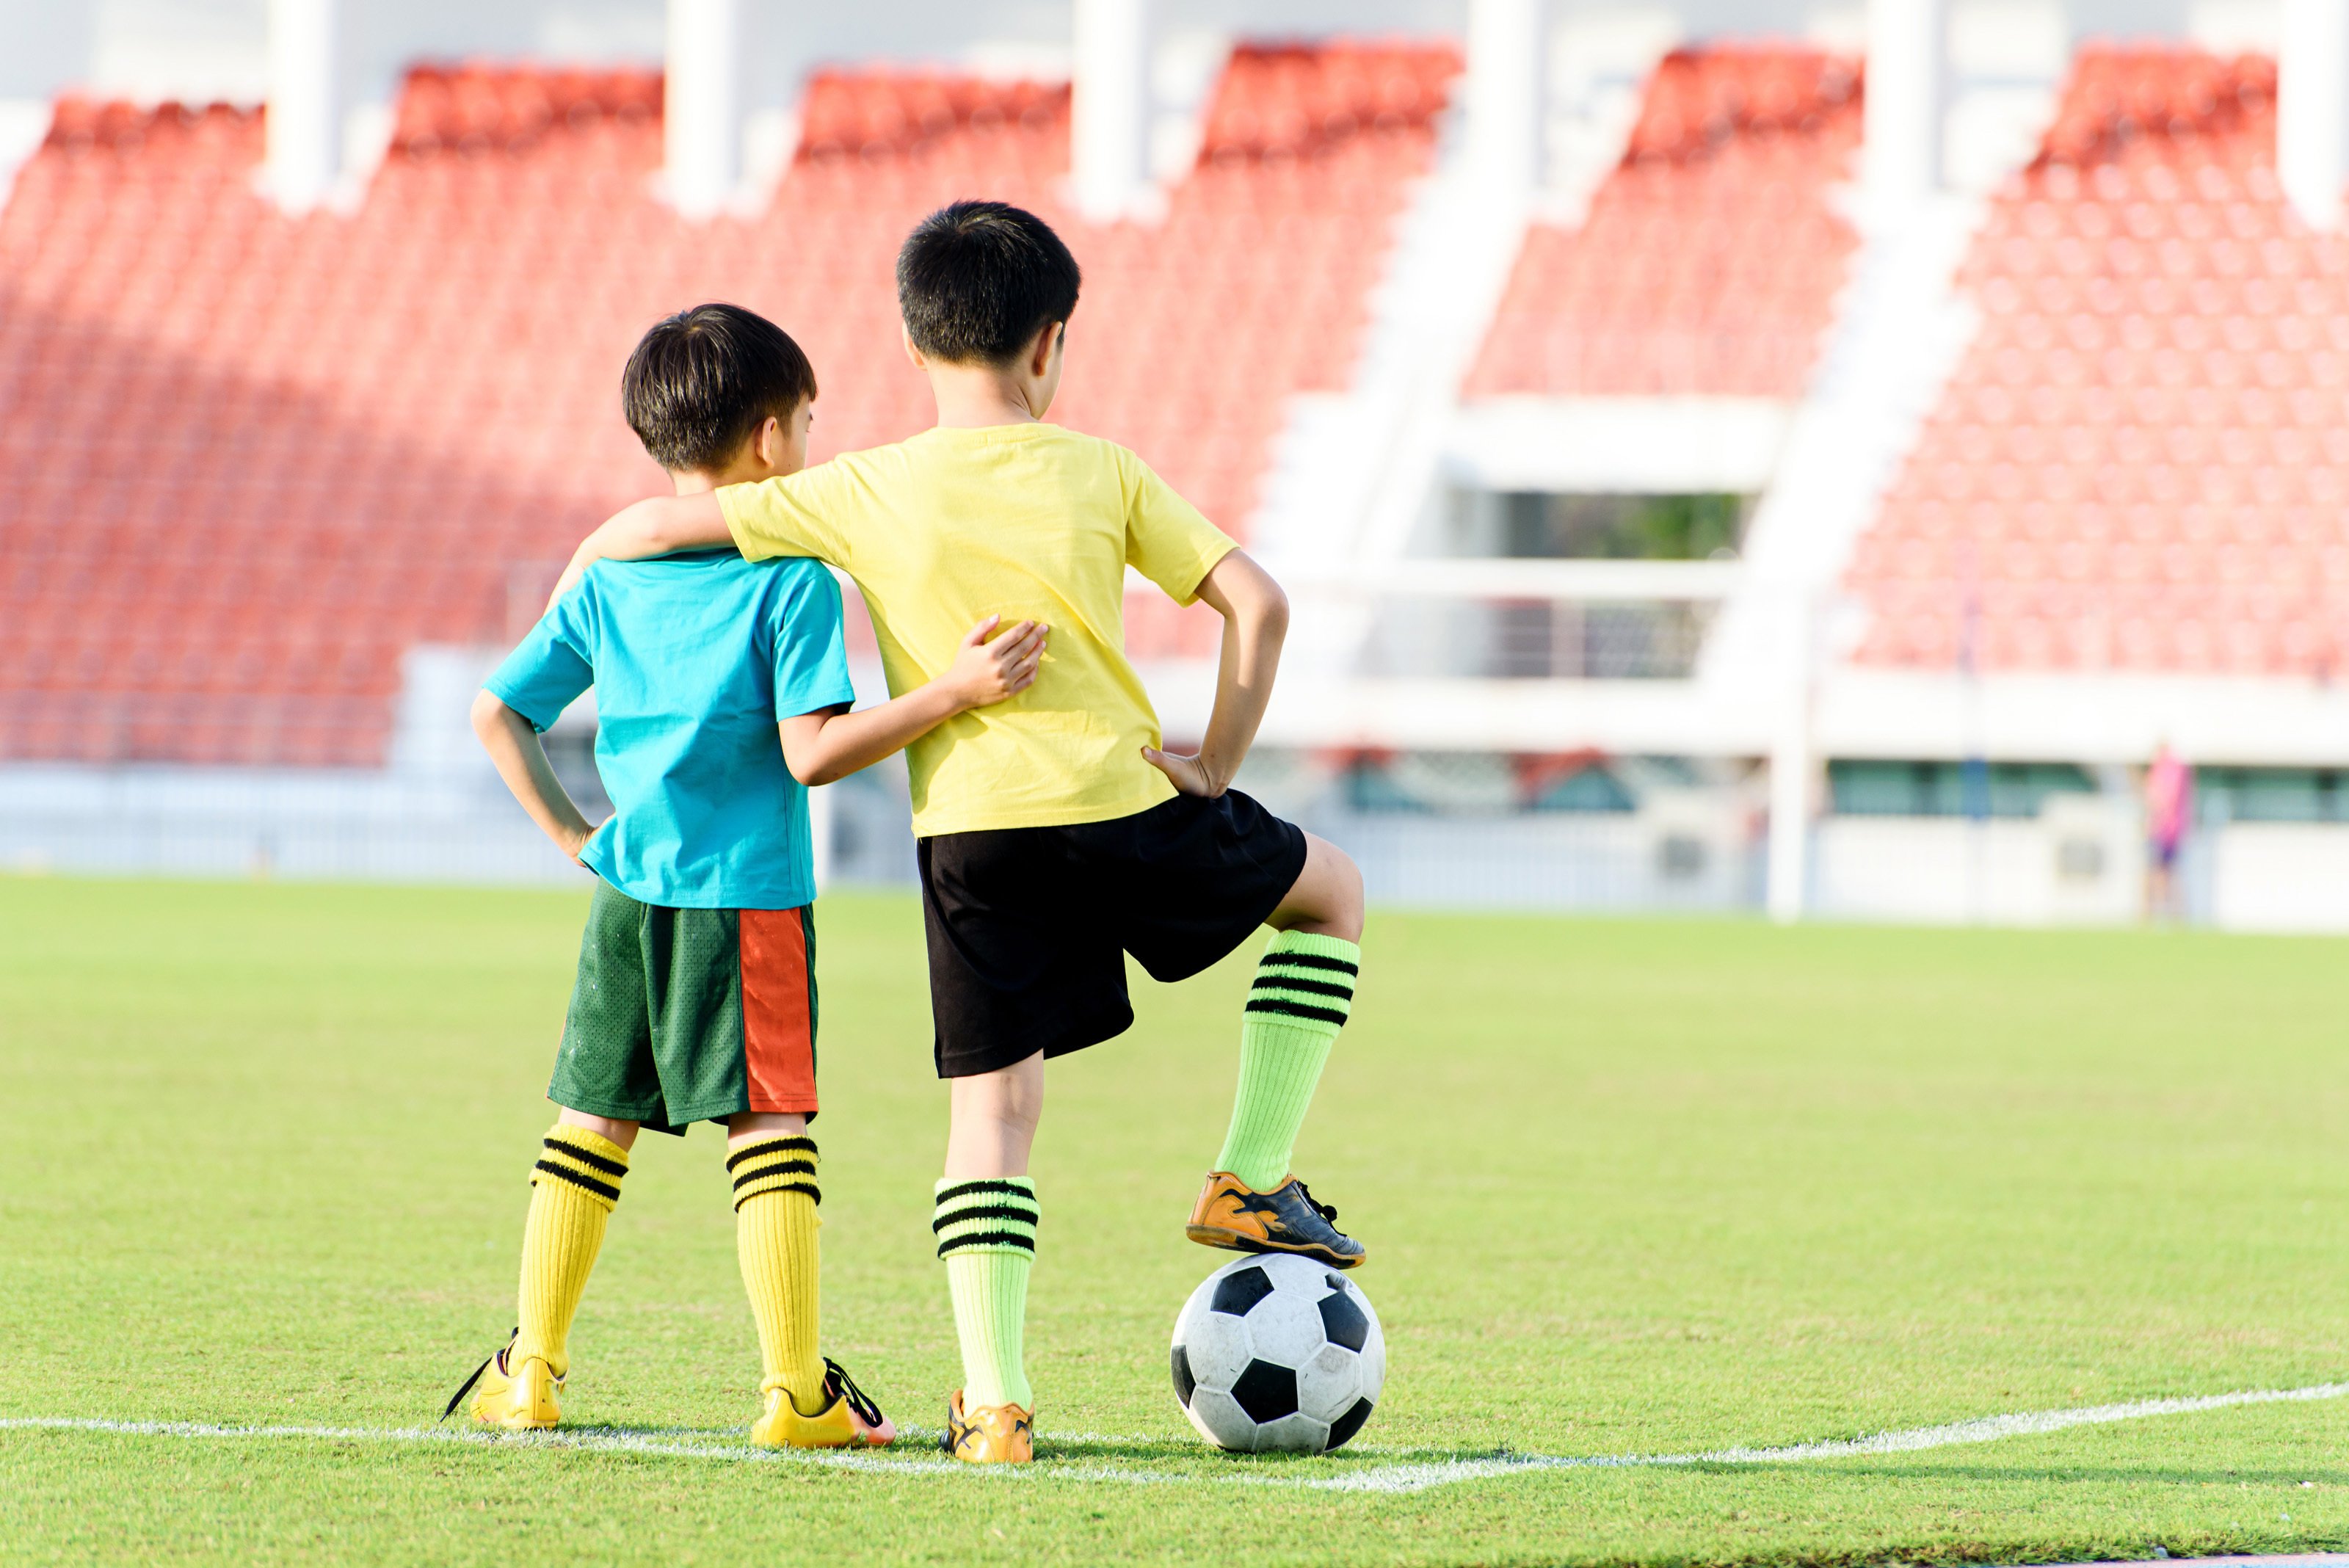 Solo Or Team Sport – Choosing the Best for Your Child